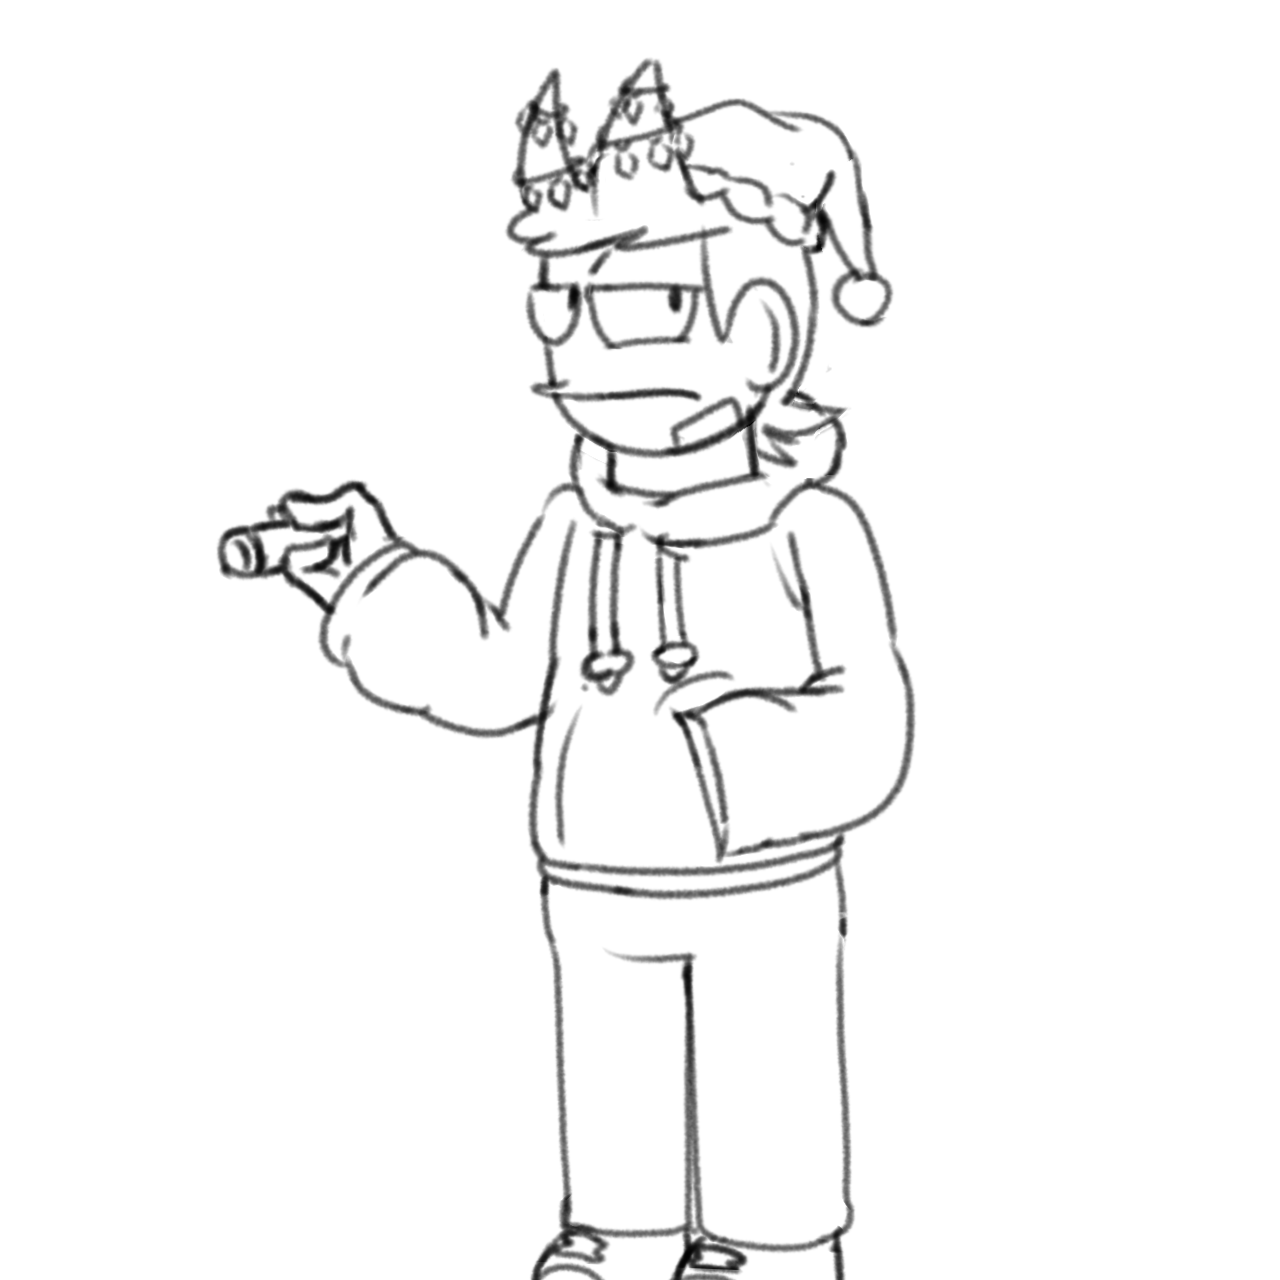 Am working on a Tord drawing. This is the process of it, how dose it look  so far? : r/Eddsworld